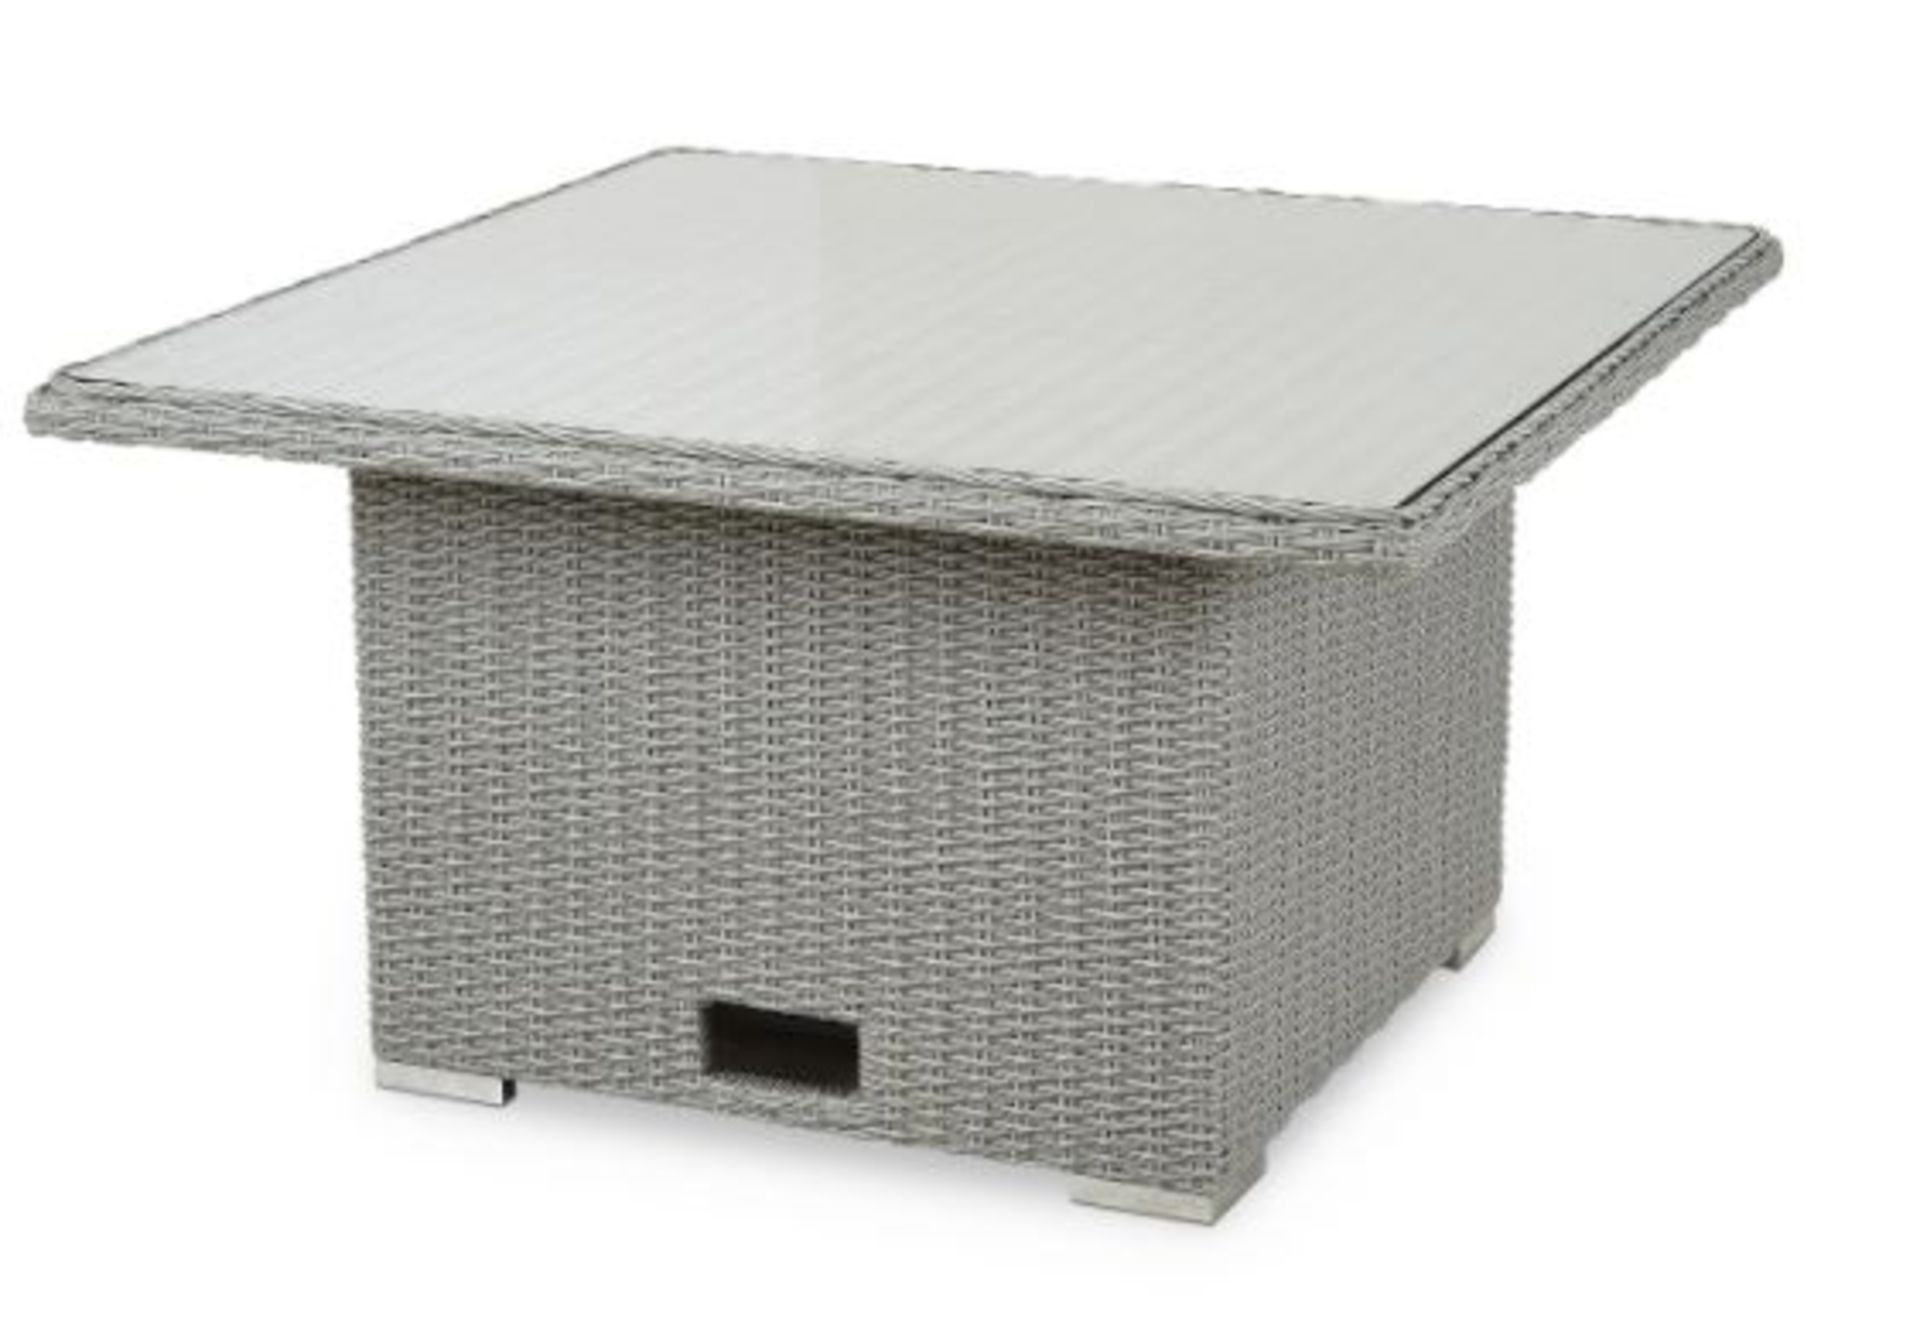 NEW BOXED Gabbs Rattan Glass Top Table. This Gabbs rattan effect 4 seater table is perfect for